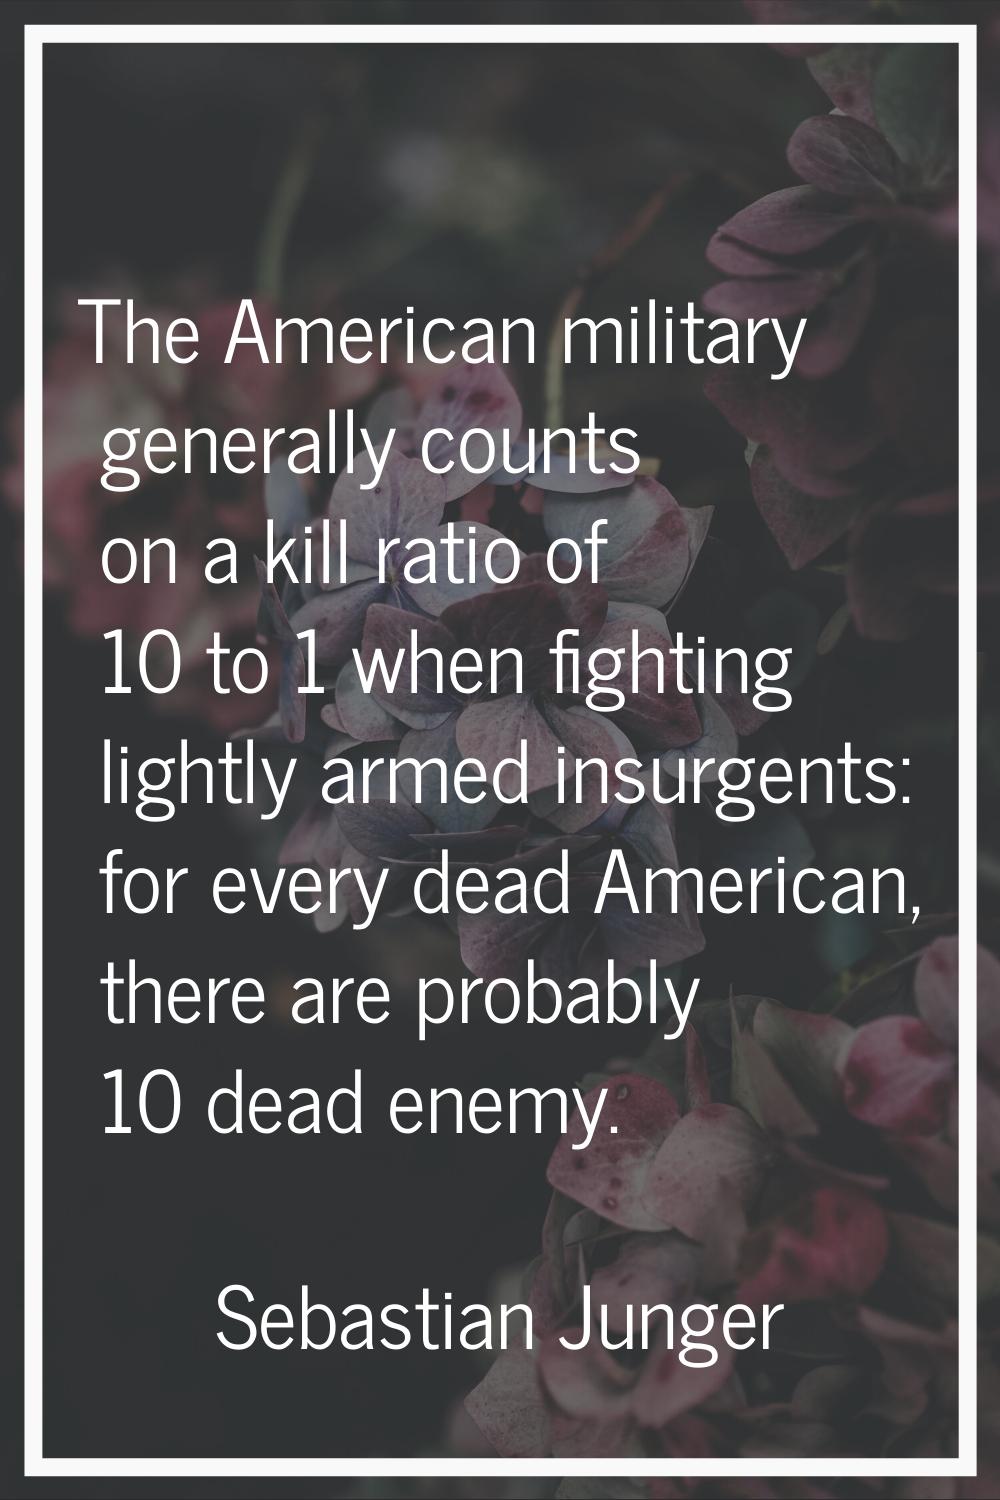 The American military generally counts on a kill ratio of 10 to 1 when fighting lightly armed insur